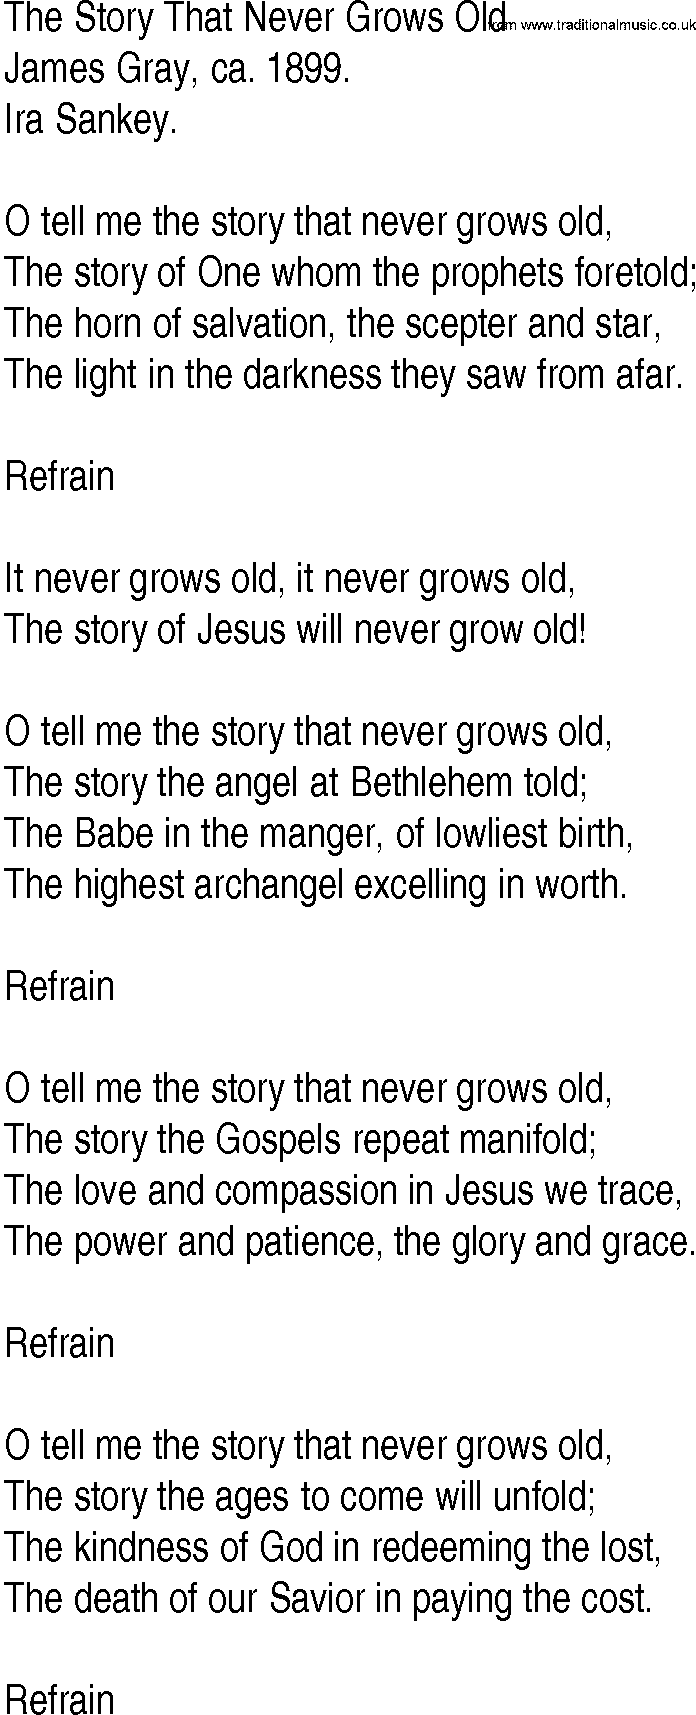 Hymn and Gospel Song: The Story That Never Grows Old by James Gray ca lyrics